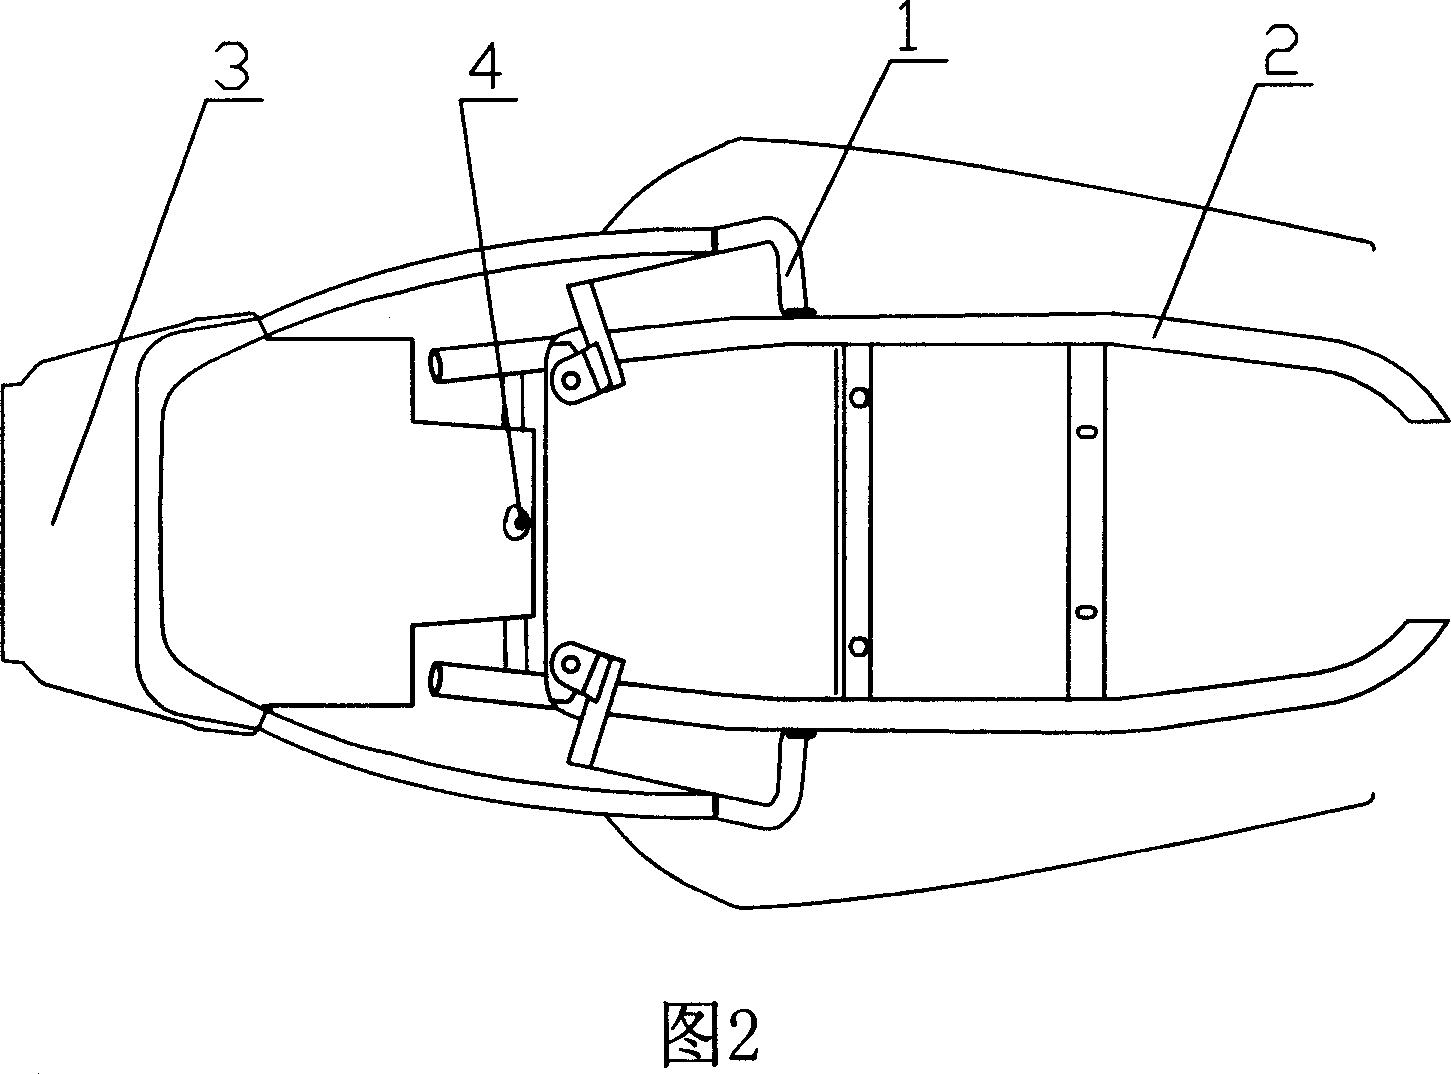 Rear basket of motorcycle and tail-cover positioning mechanism